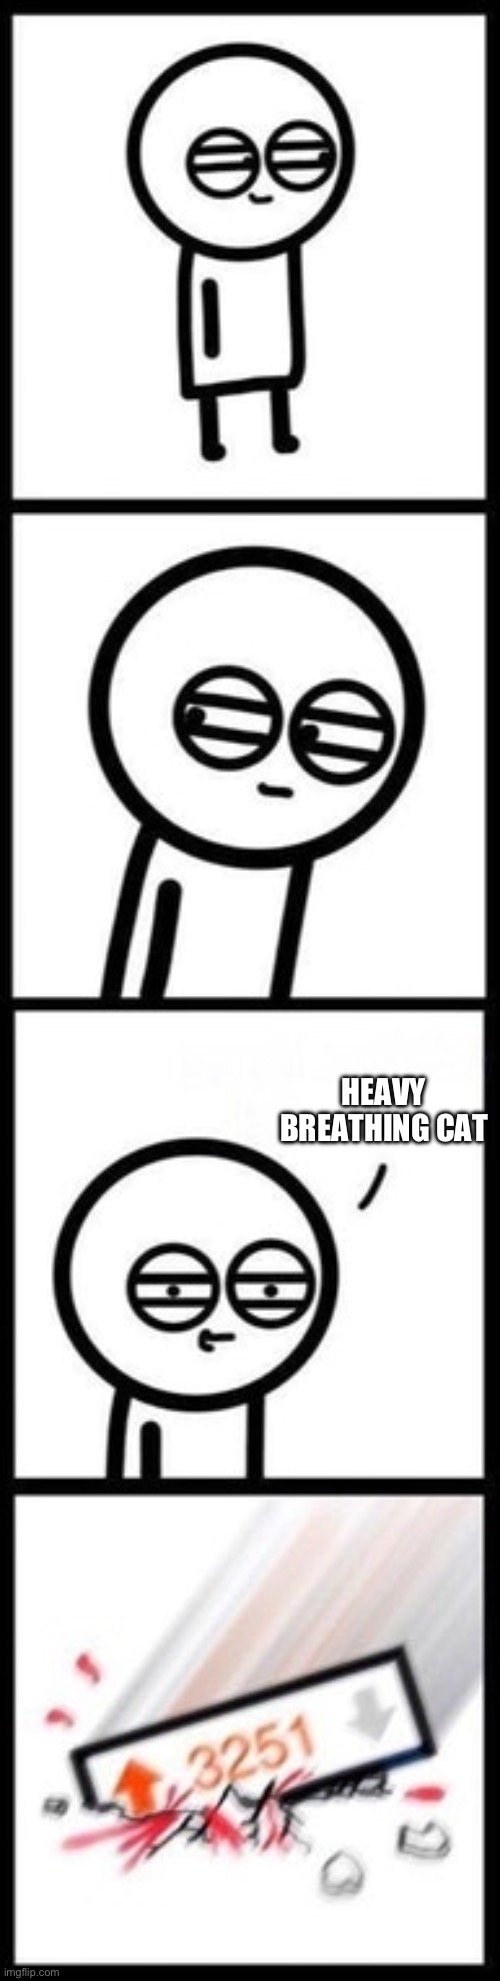 3251 upvotes | HEAVY BREATHING CAT | image tagged in 3251 upvotes | made w/ Imgflip meme maker